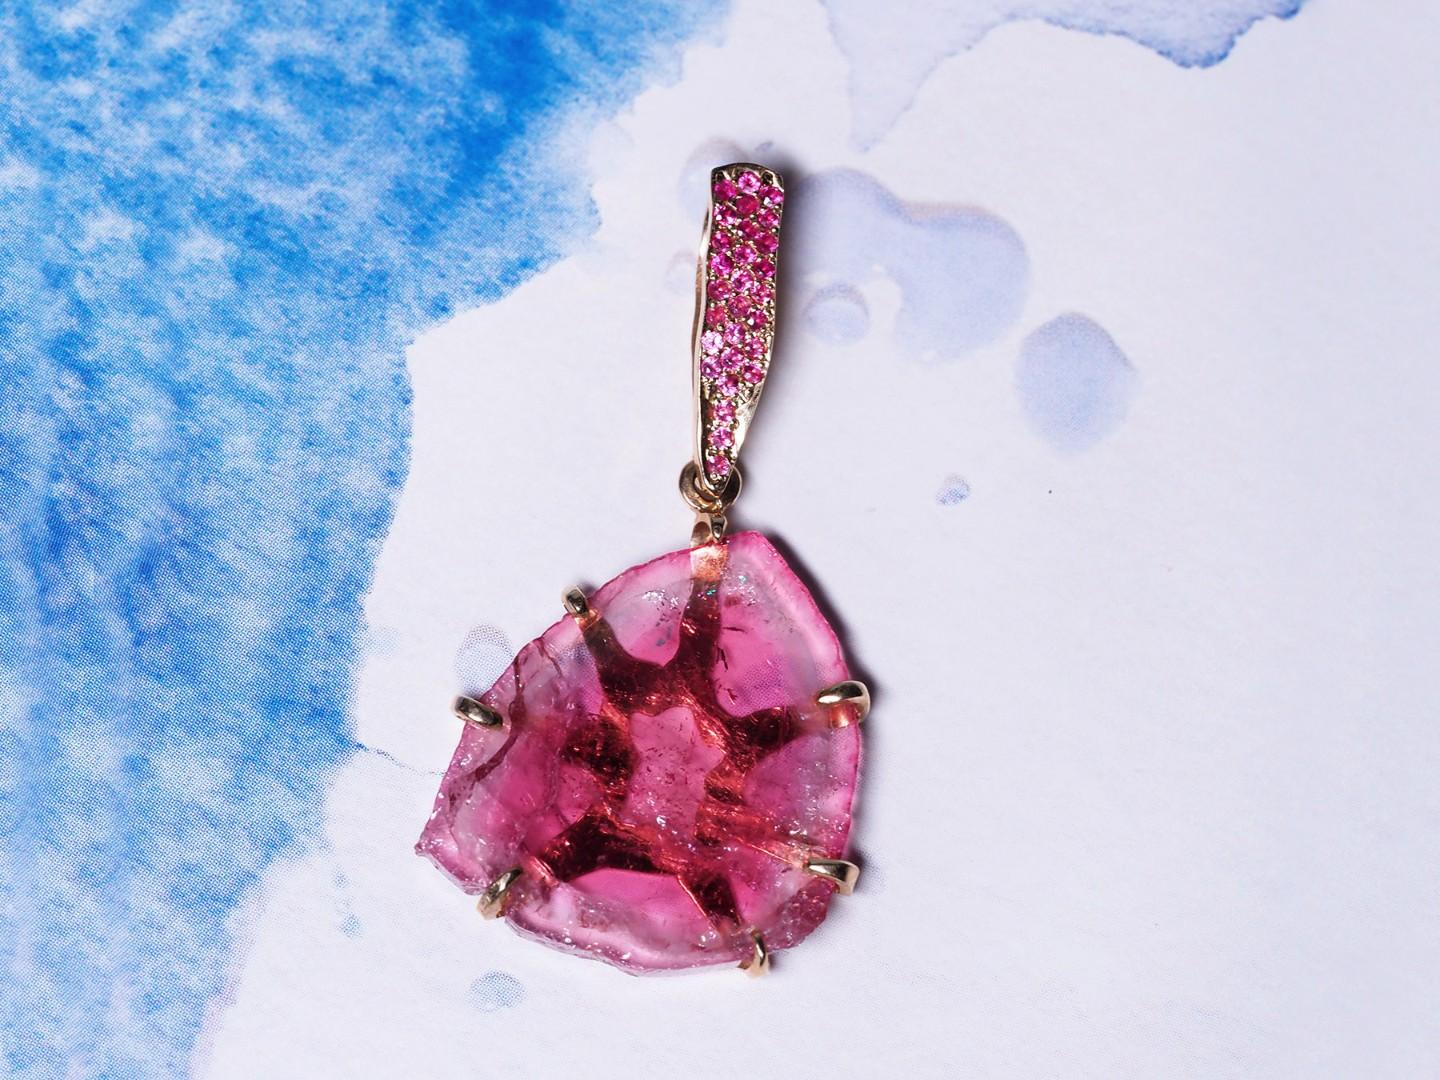 14K yellow gold pendant with natural slyce of Tourmaline Rubellite
surrounded by 28 colored sapphires with a total weight of 0.157 carats
tourmaline measurements - 0.079 х 0.71 х 0.87 in / 2 х 18 х 22 mm
tourmaline weight - 9.21 carats
pendant